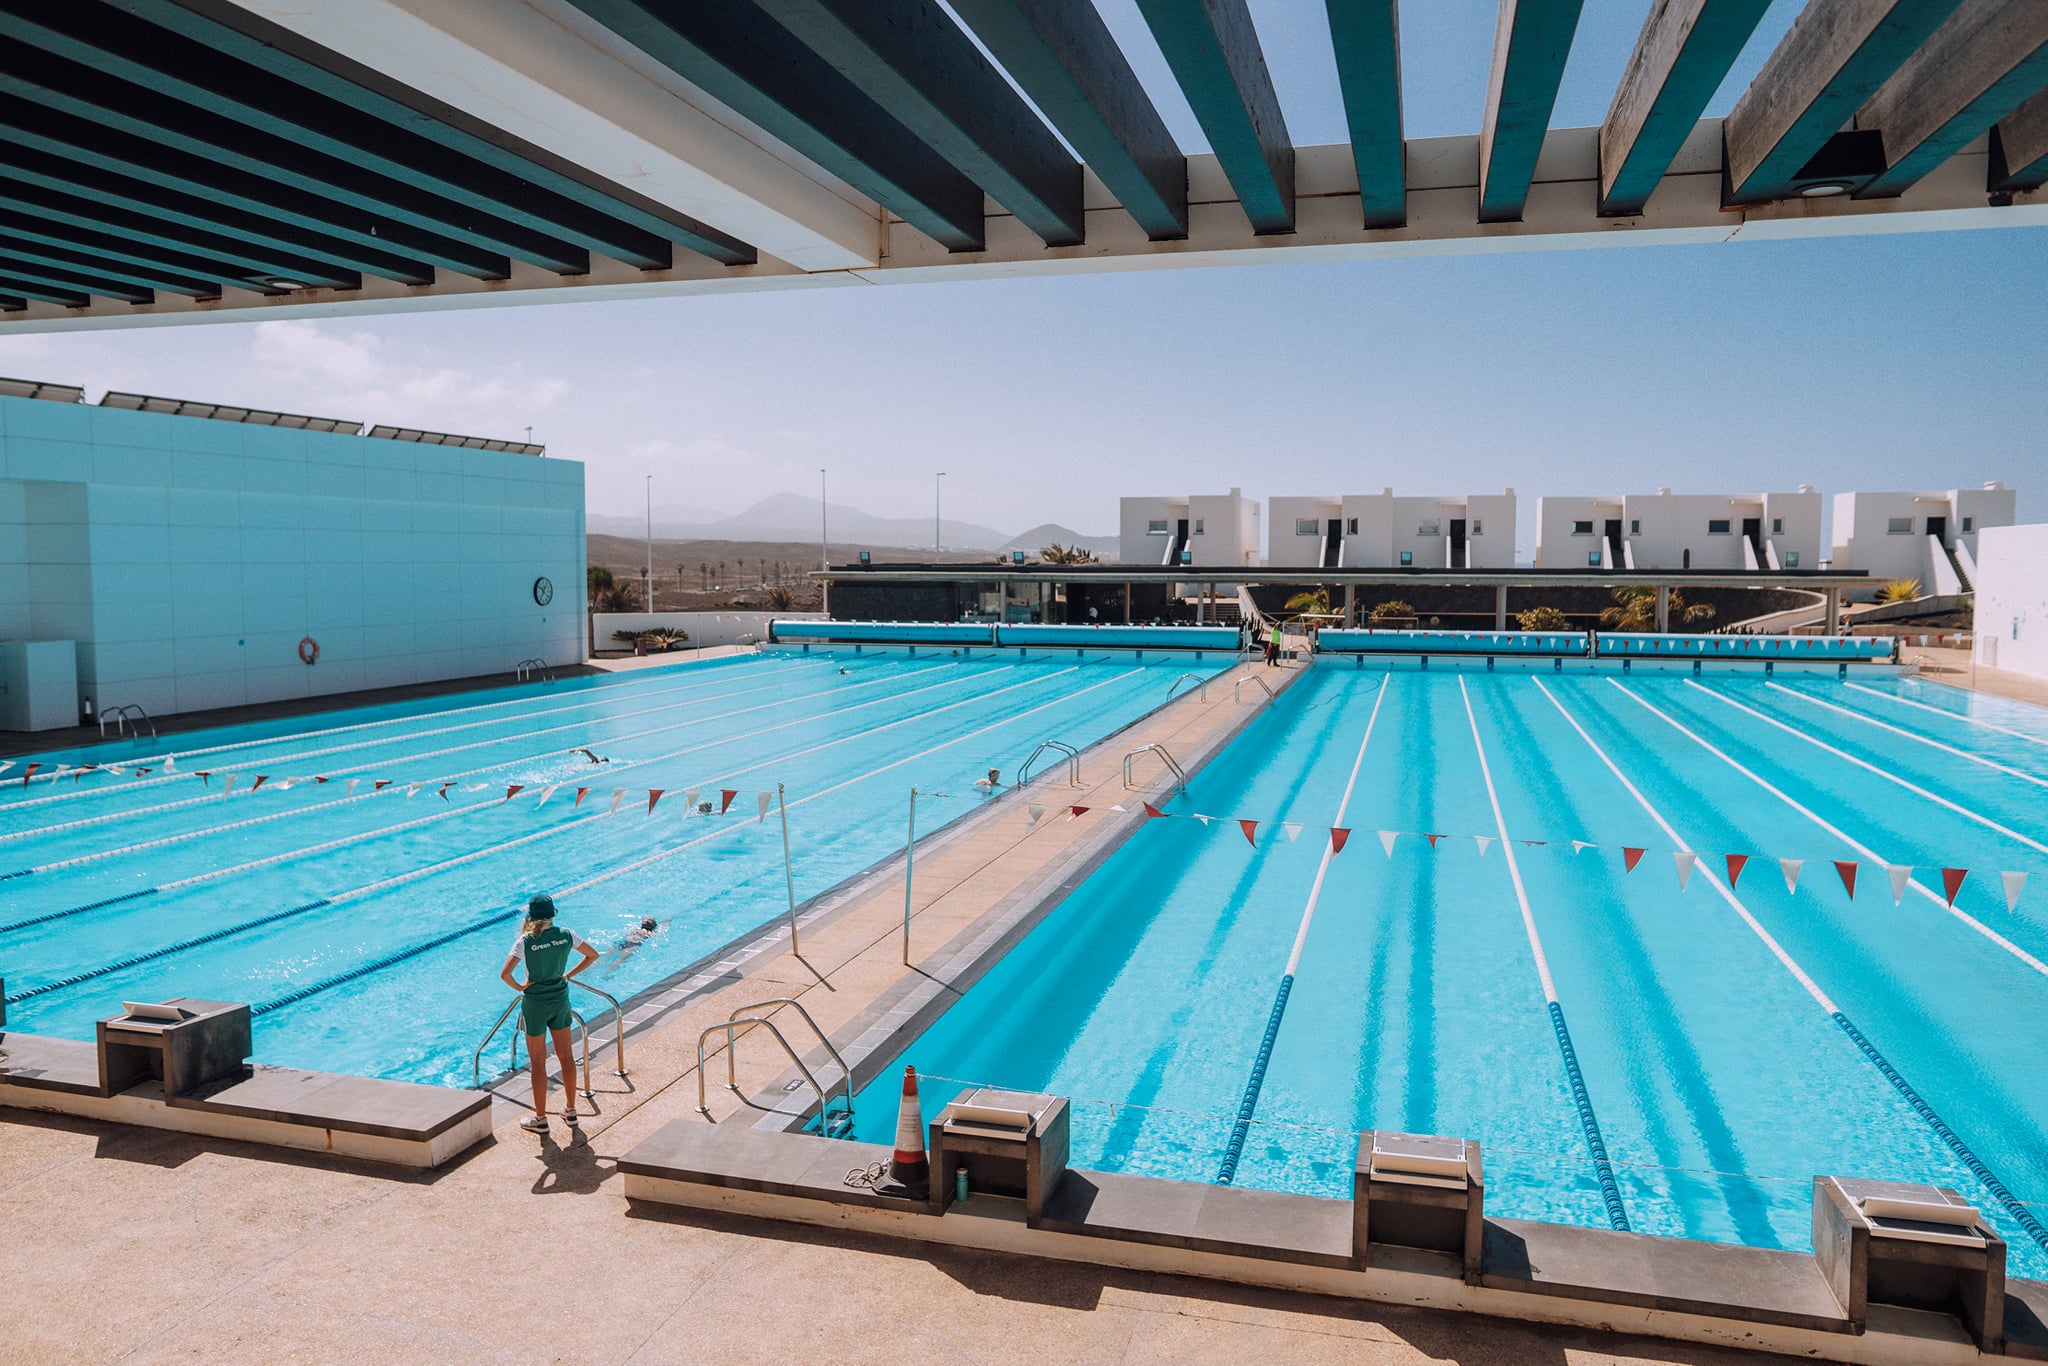 The south pool – two full Olympic-sized pools with grandstand viewing